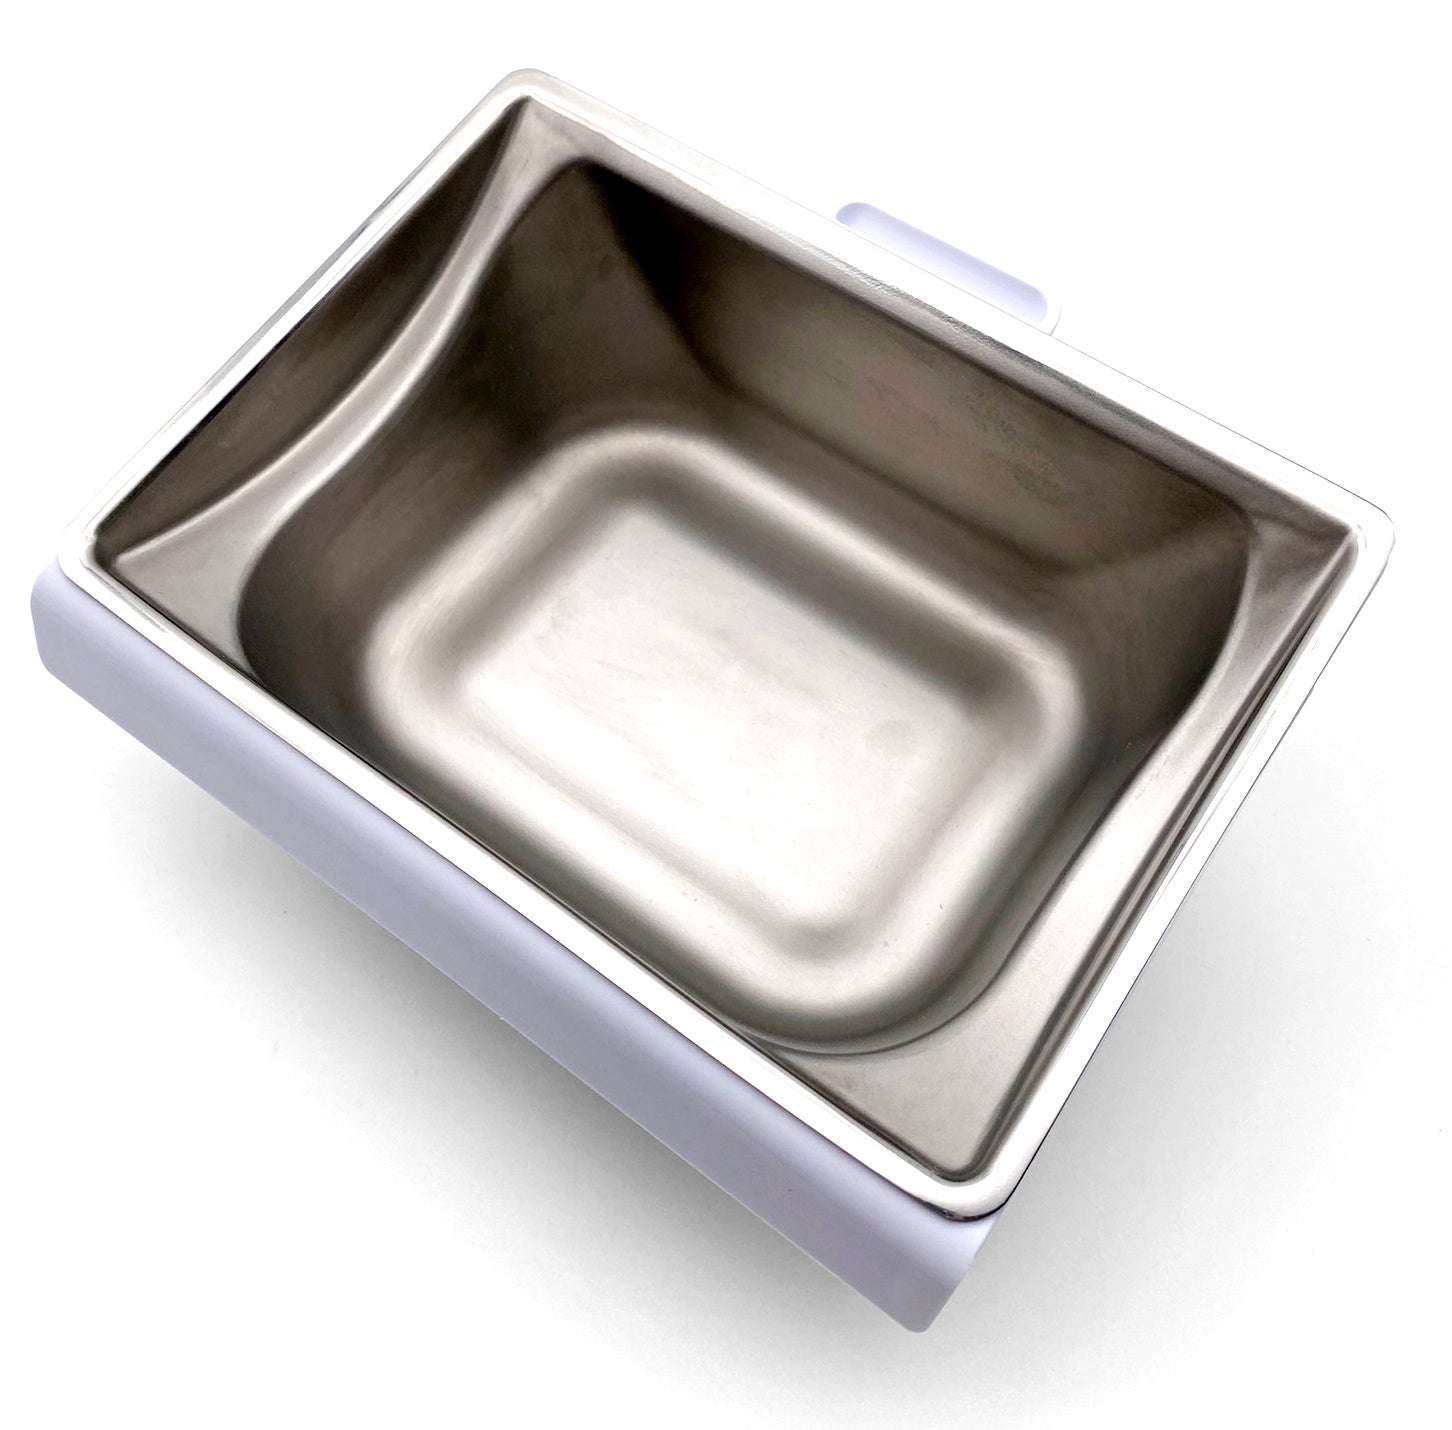 Stainless Steel Bowl Inserts x 2 for Closer Pets MiBowl Automatic Microchip Pet Feeder (CP504)